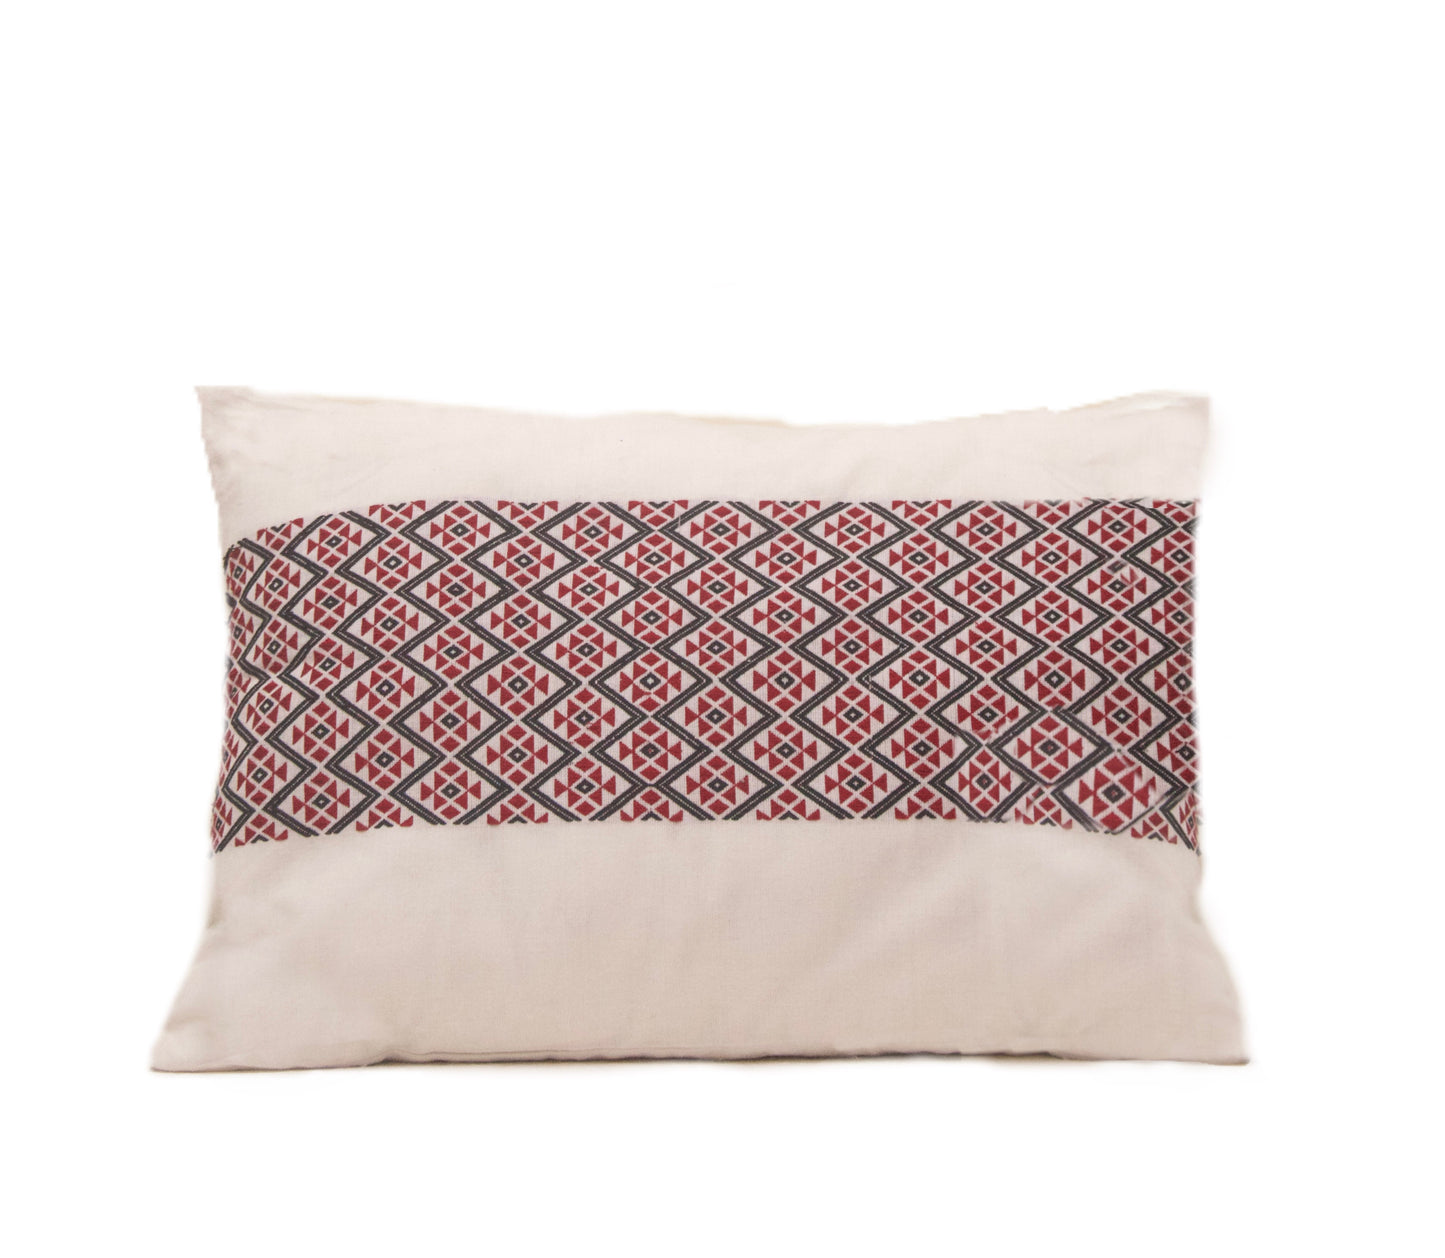 Ahom Handwoven Cotton Cushion Cover with Tribal Motif